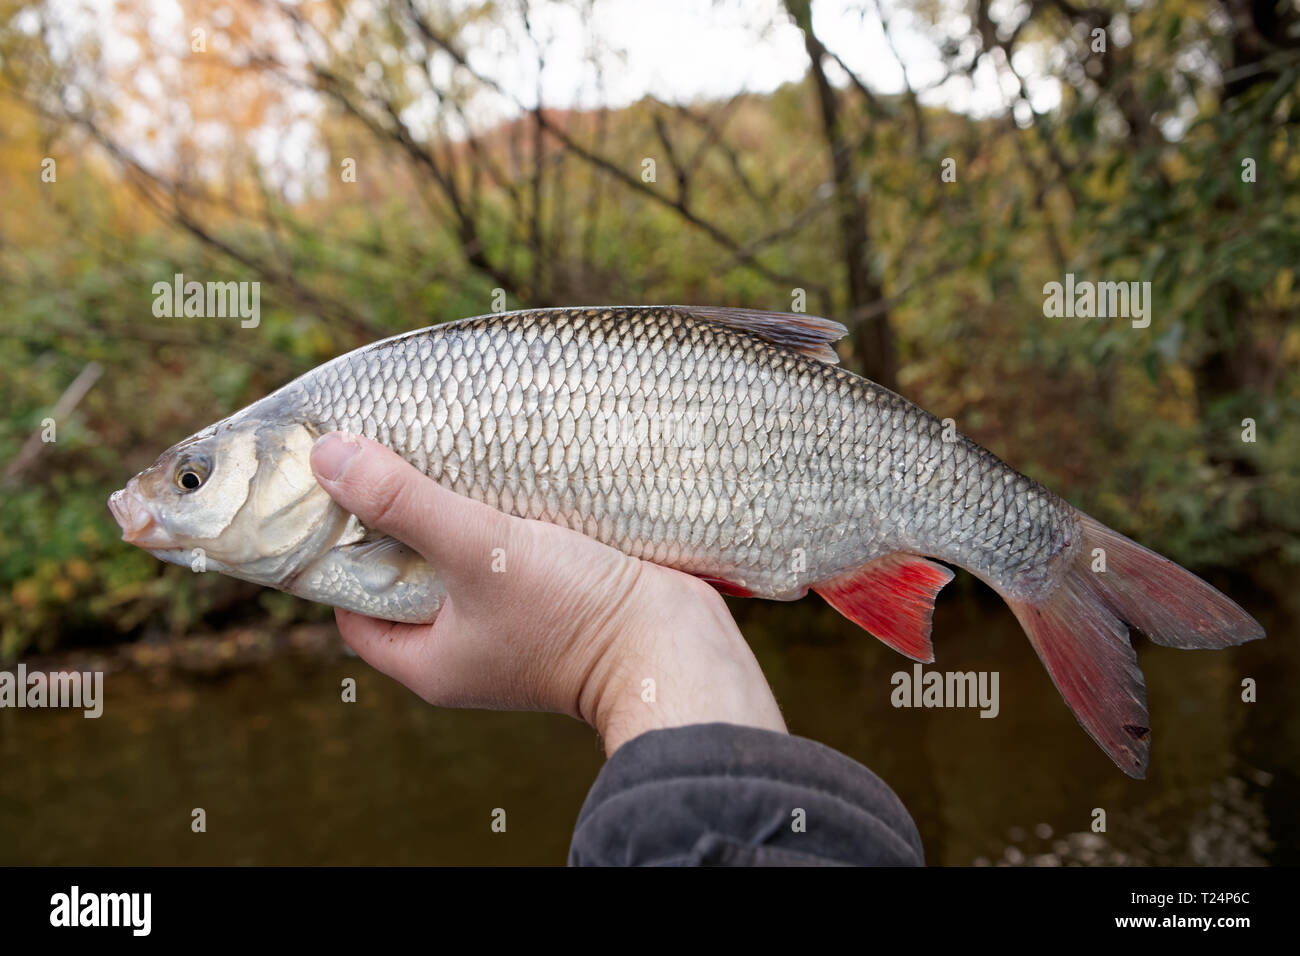 Big orfe fish in fisherman's hand caught in autumn Stock Photo